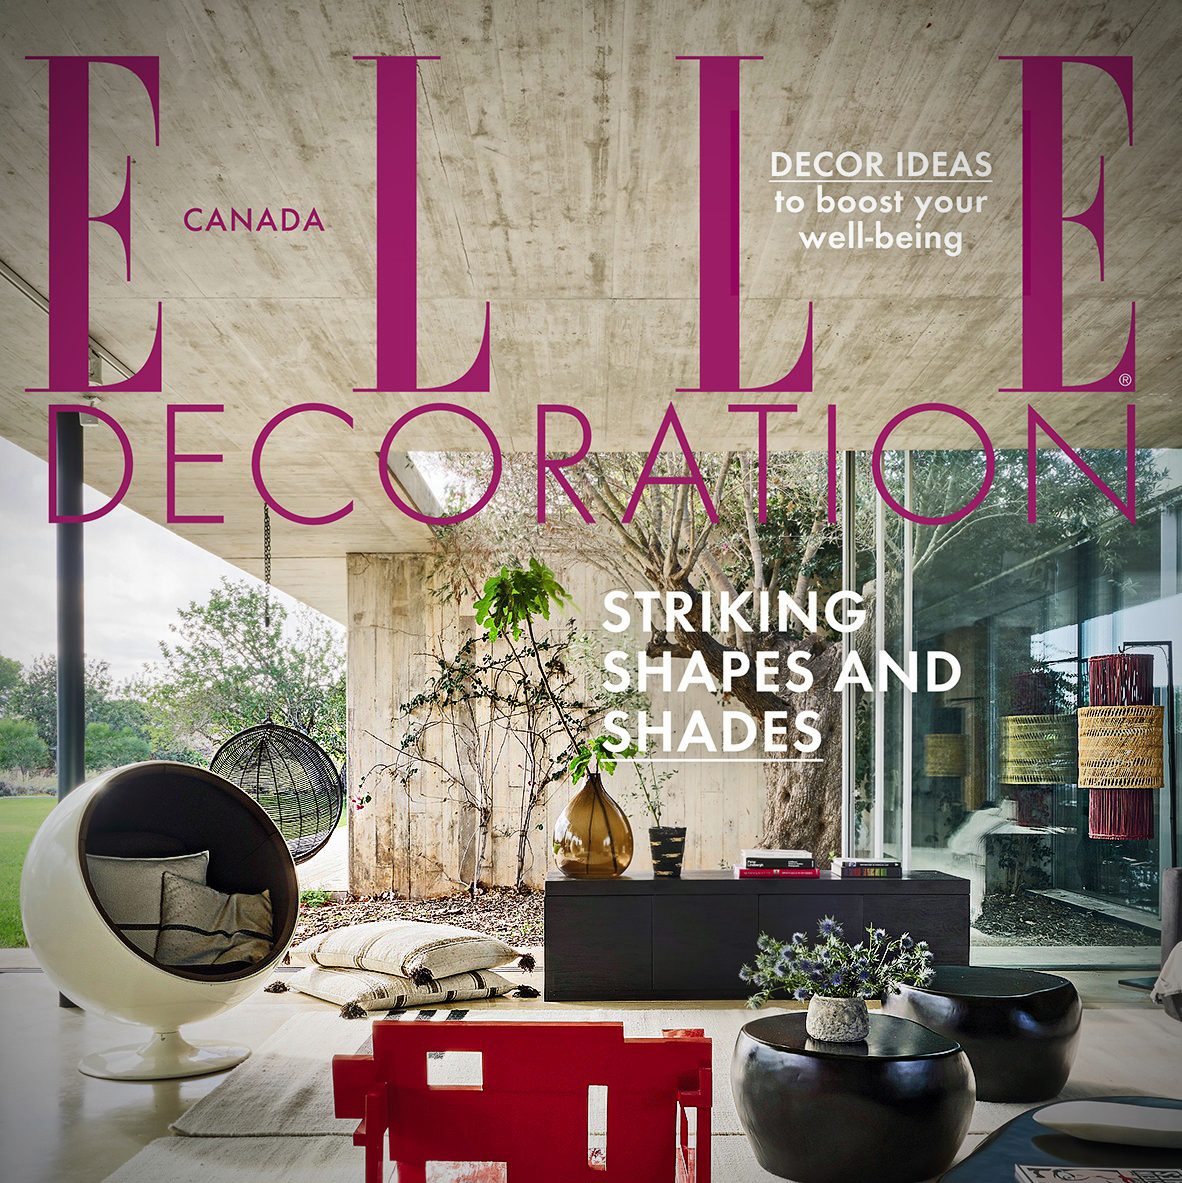 Elle Canada released spring and summer issue via 360 MAGAZINE.